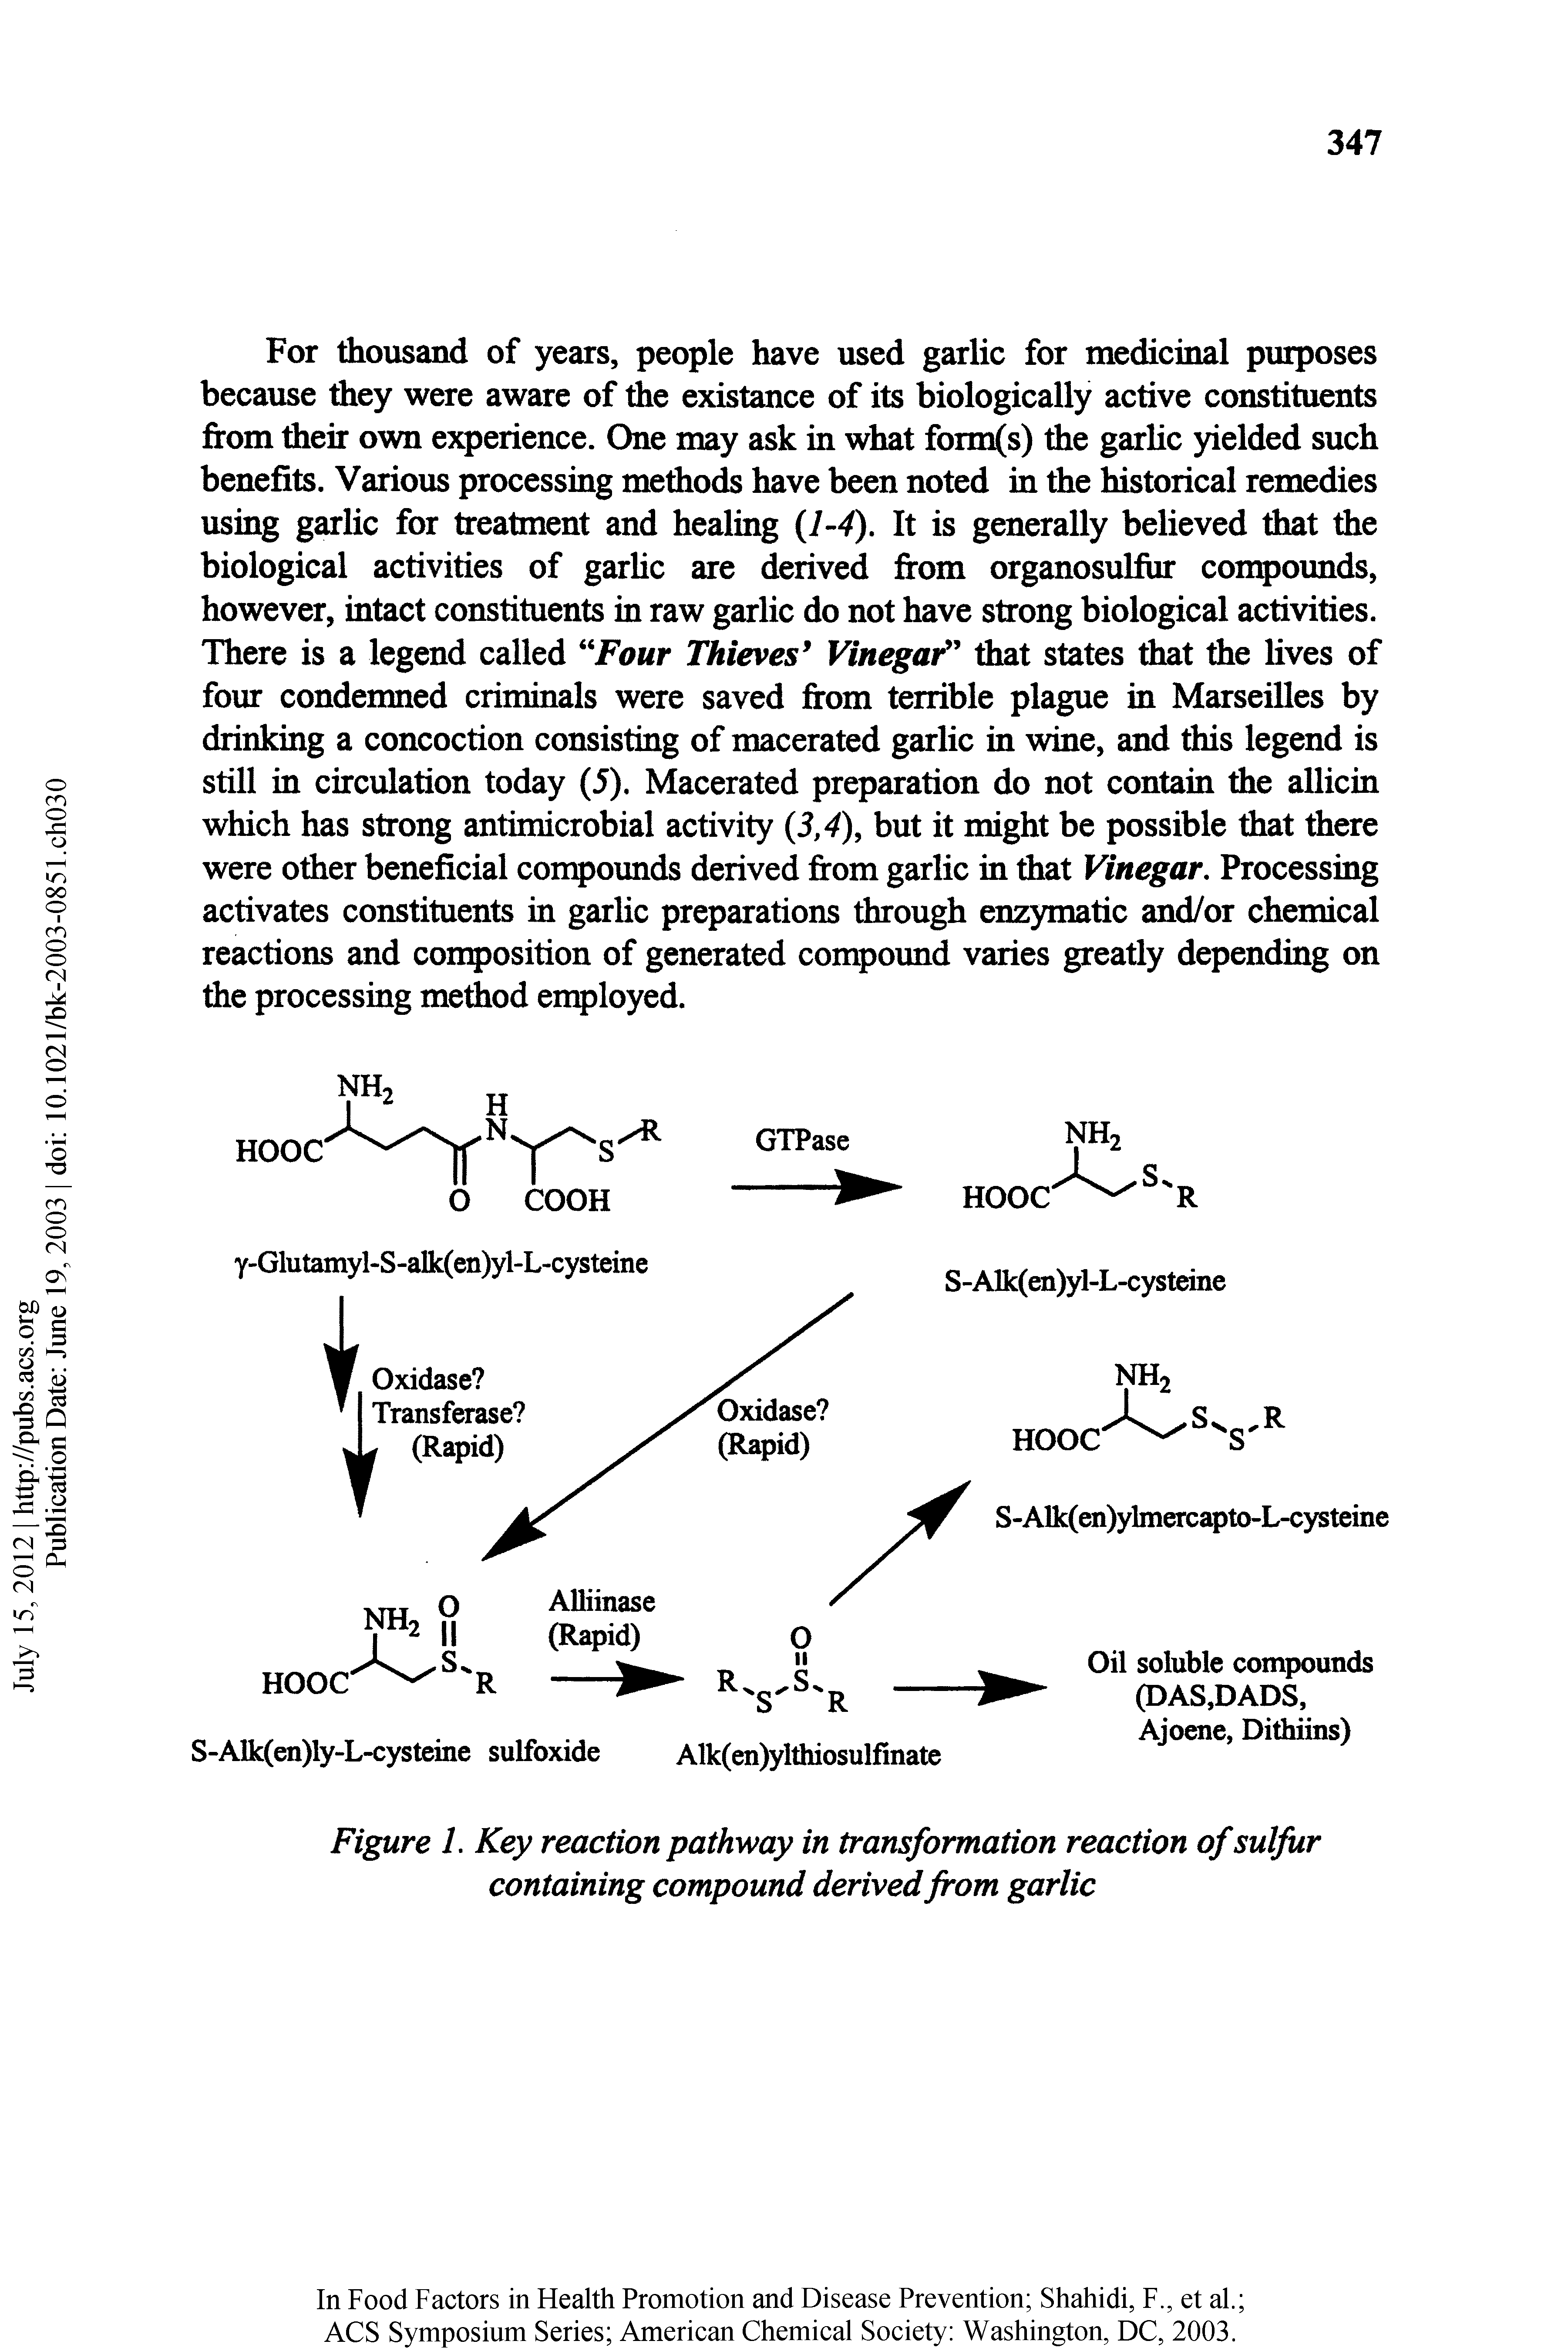 Figure 1. Key reaction pathway in transformation reaction of sulfur containing compound derived from garlic...